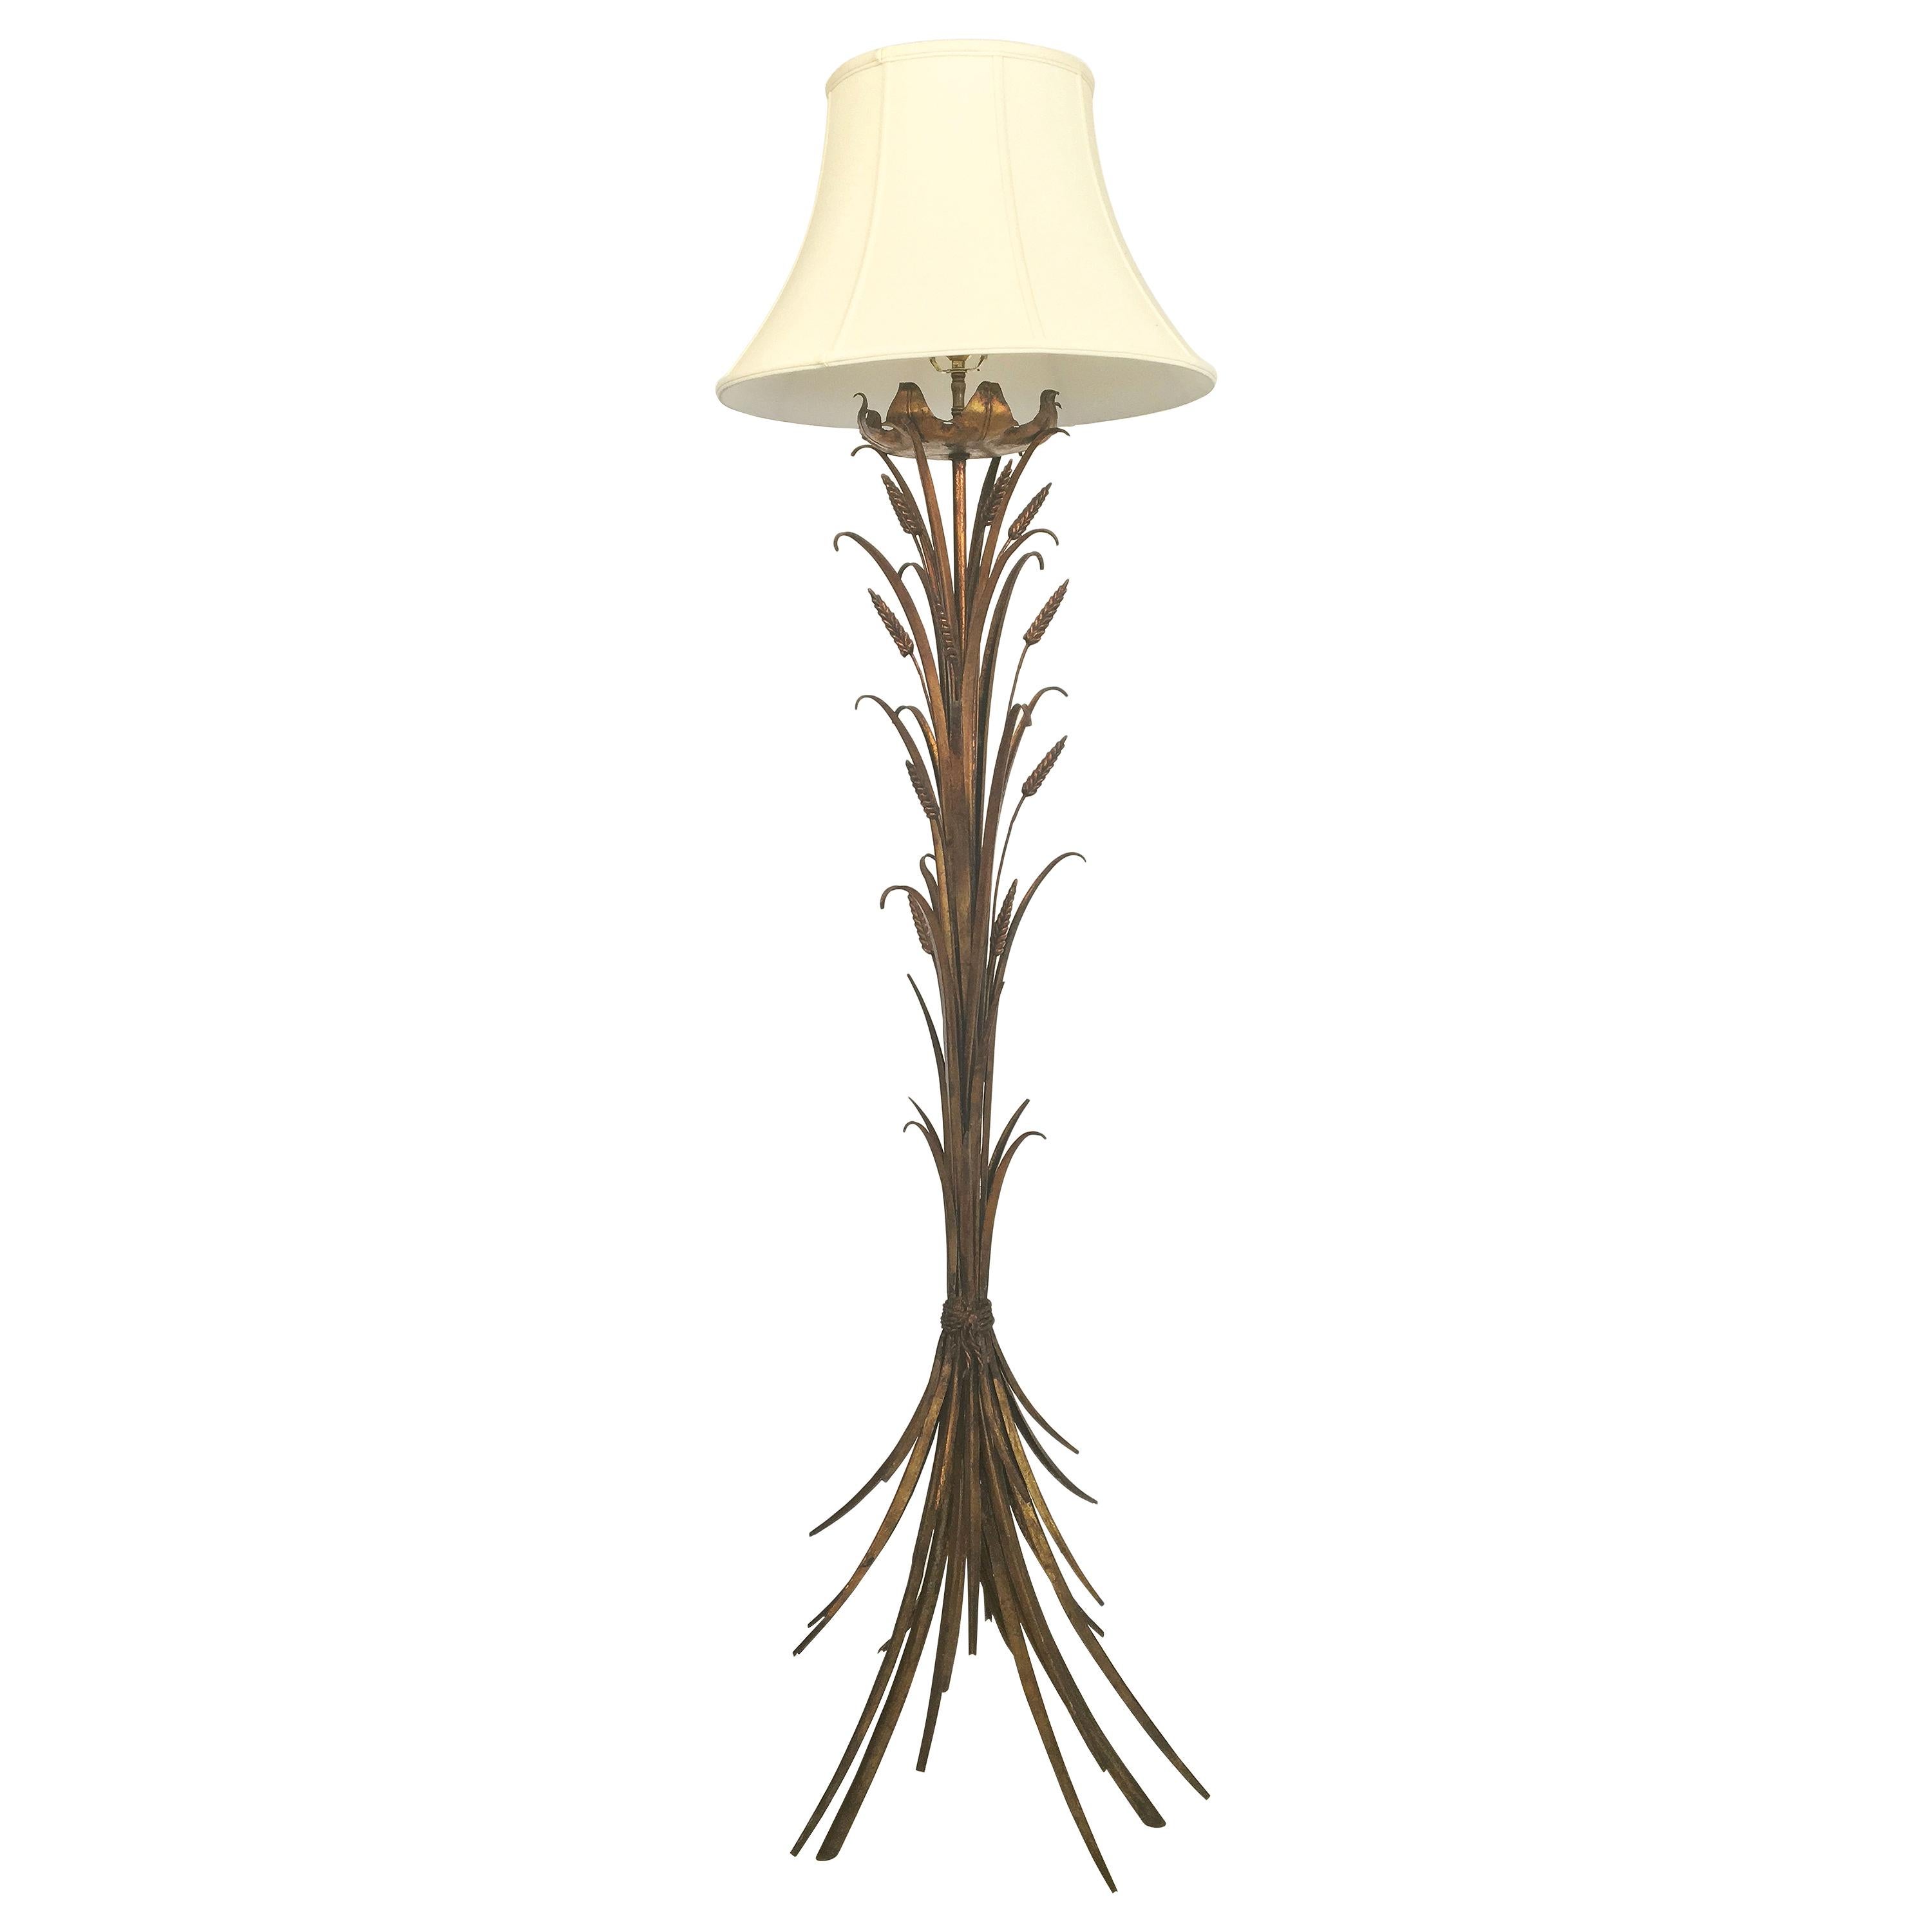 French Gilt Wheat Sheaf Floor Lamp with Shade